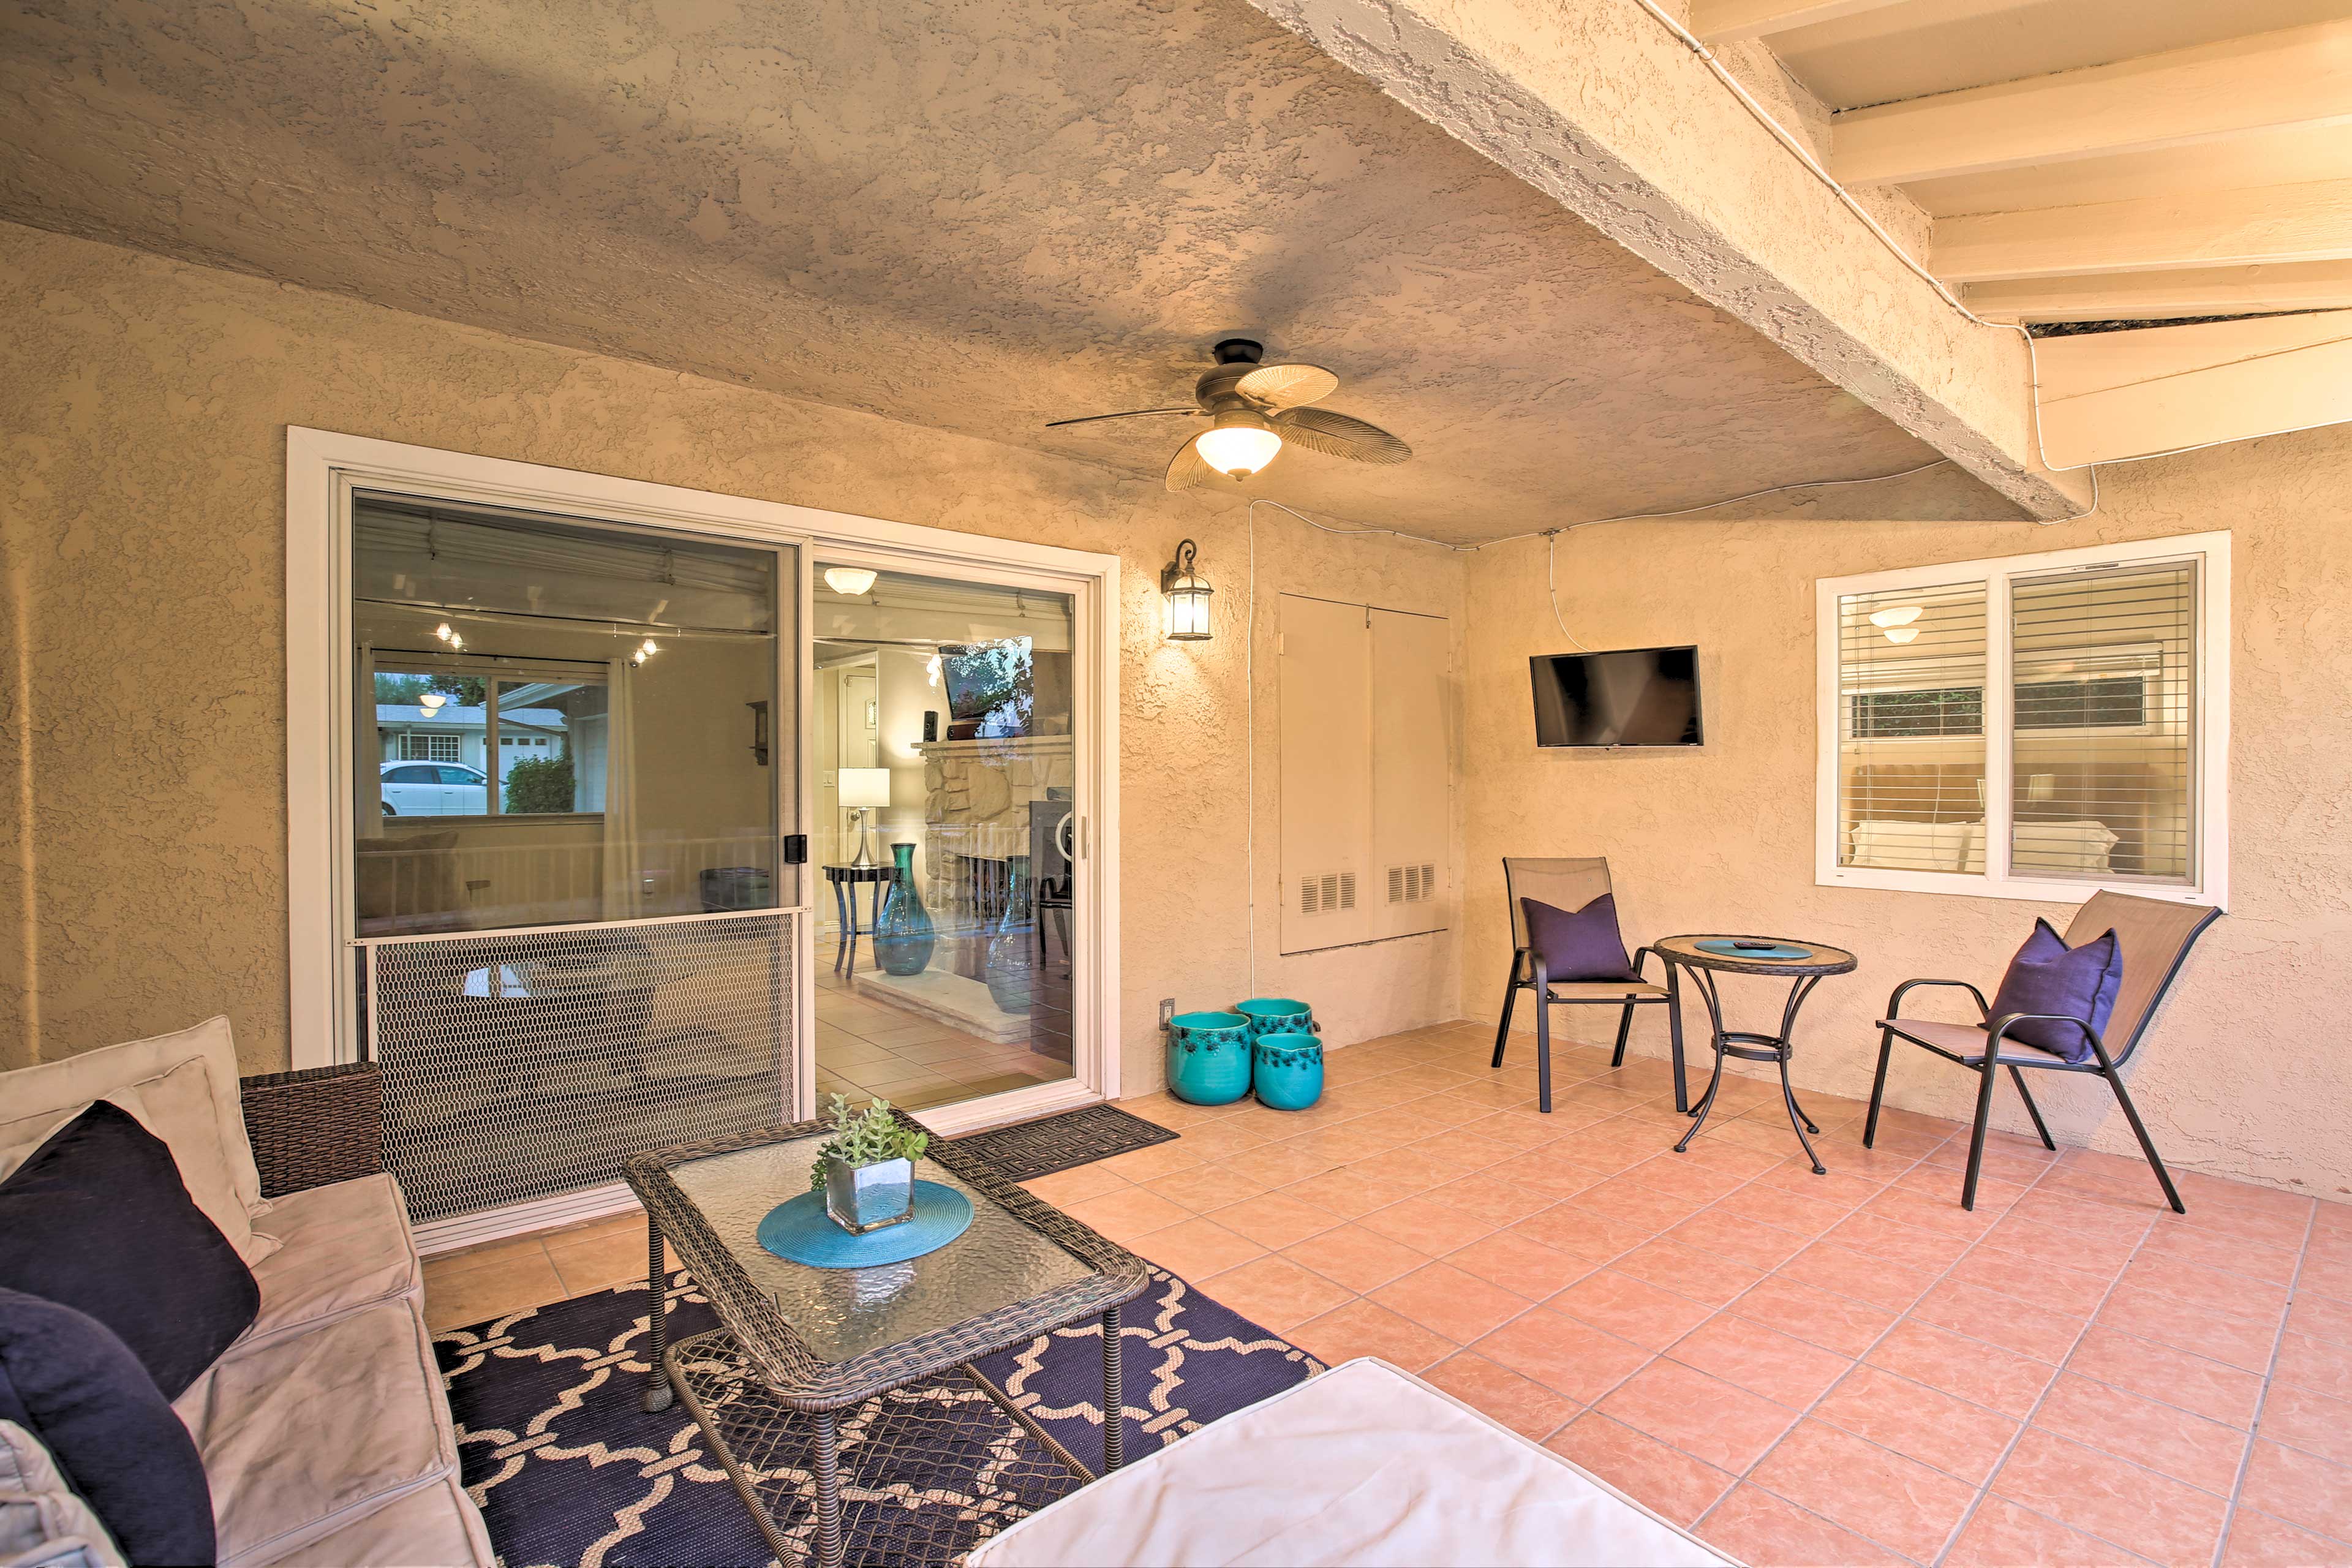 You'll love relaxing on the lighted patio on warm desert evenings.